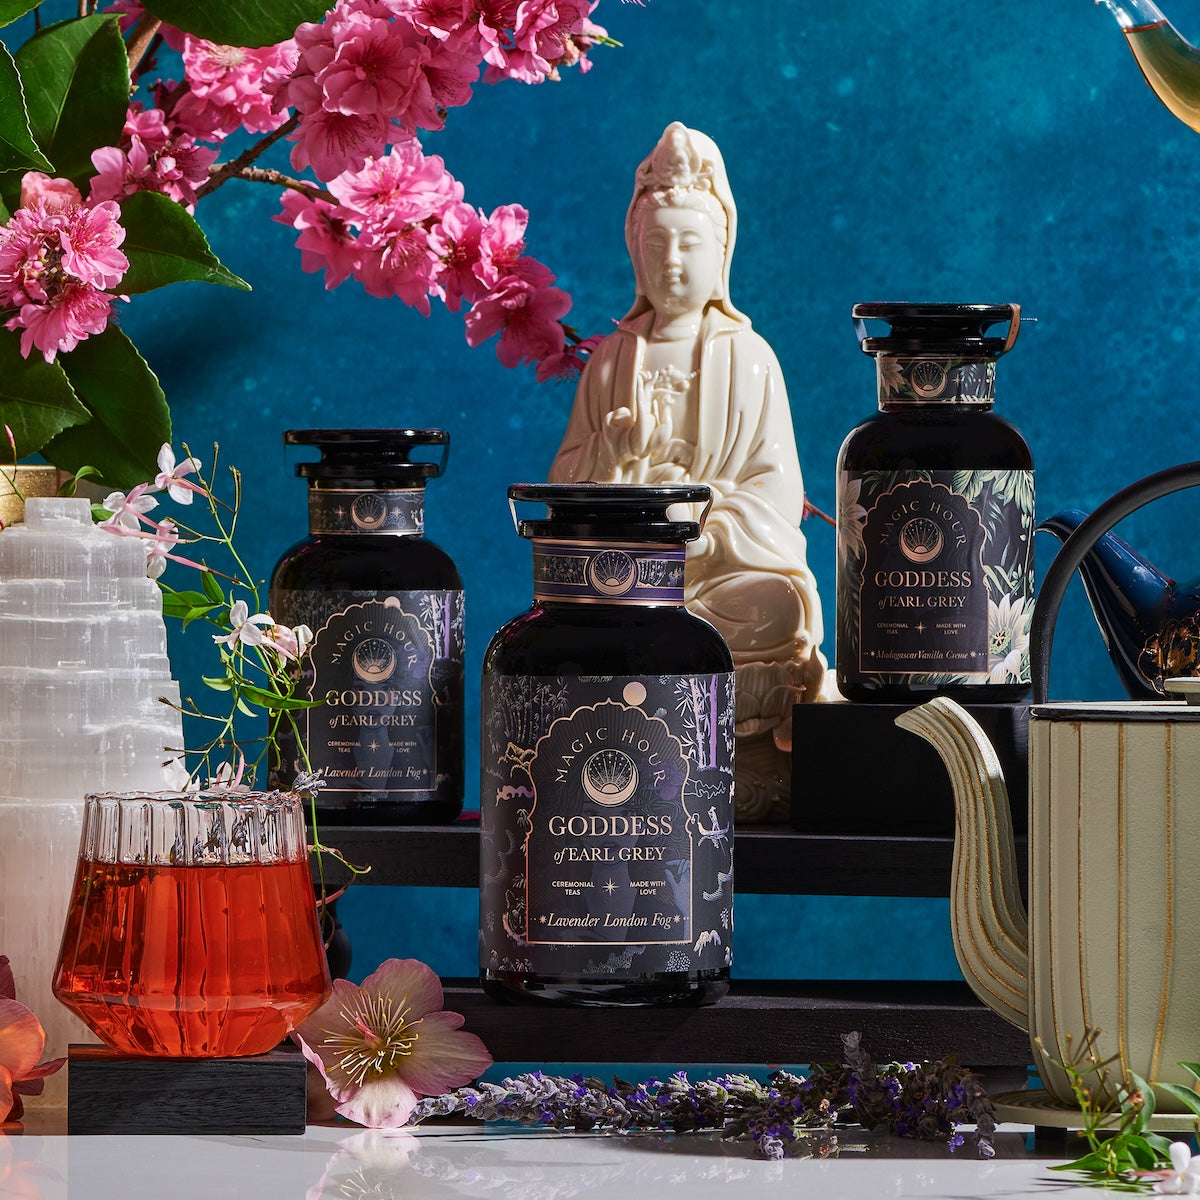 A serene display features three &quot;Goddess of Earl: Lavender London Fog- Tea for Blooming Clarity &amp; Calm Moods&quot; jars by Magic Hour, a red glass of tea, and a teapot set against a blue backdrop. Pink flowers and a white statue of a seated figure complete the tranquil scene. A white crystal, decorative tea accessories, and the aromatherapeutic benefits of Lavender Earl Grey enhance relaxation and calm focus.